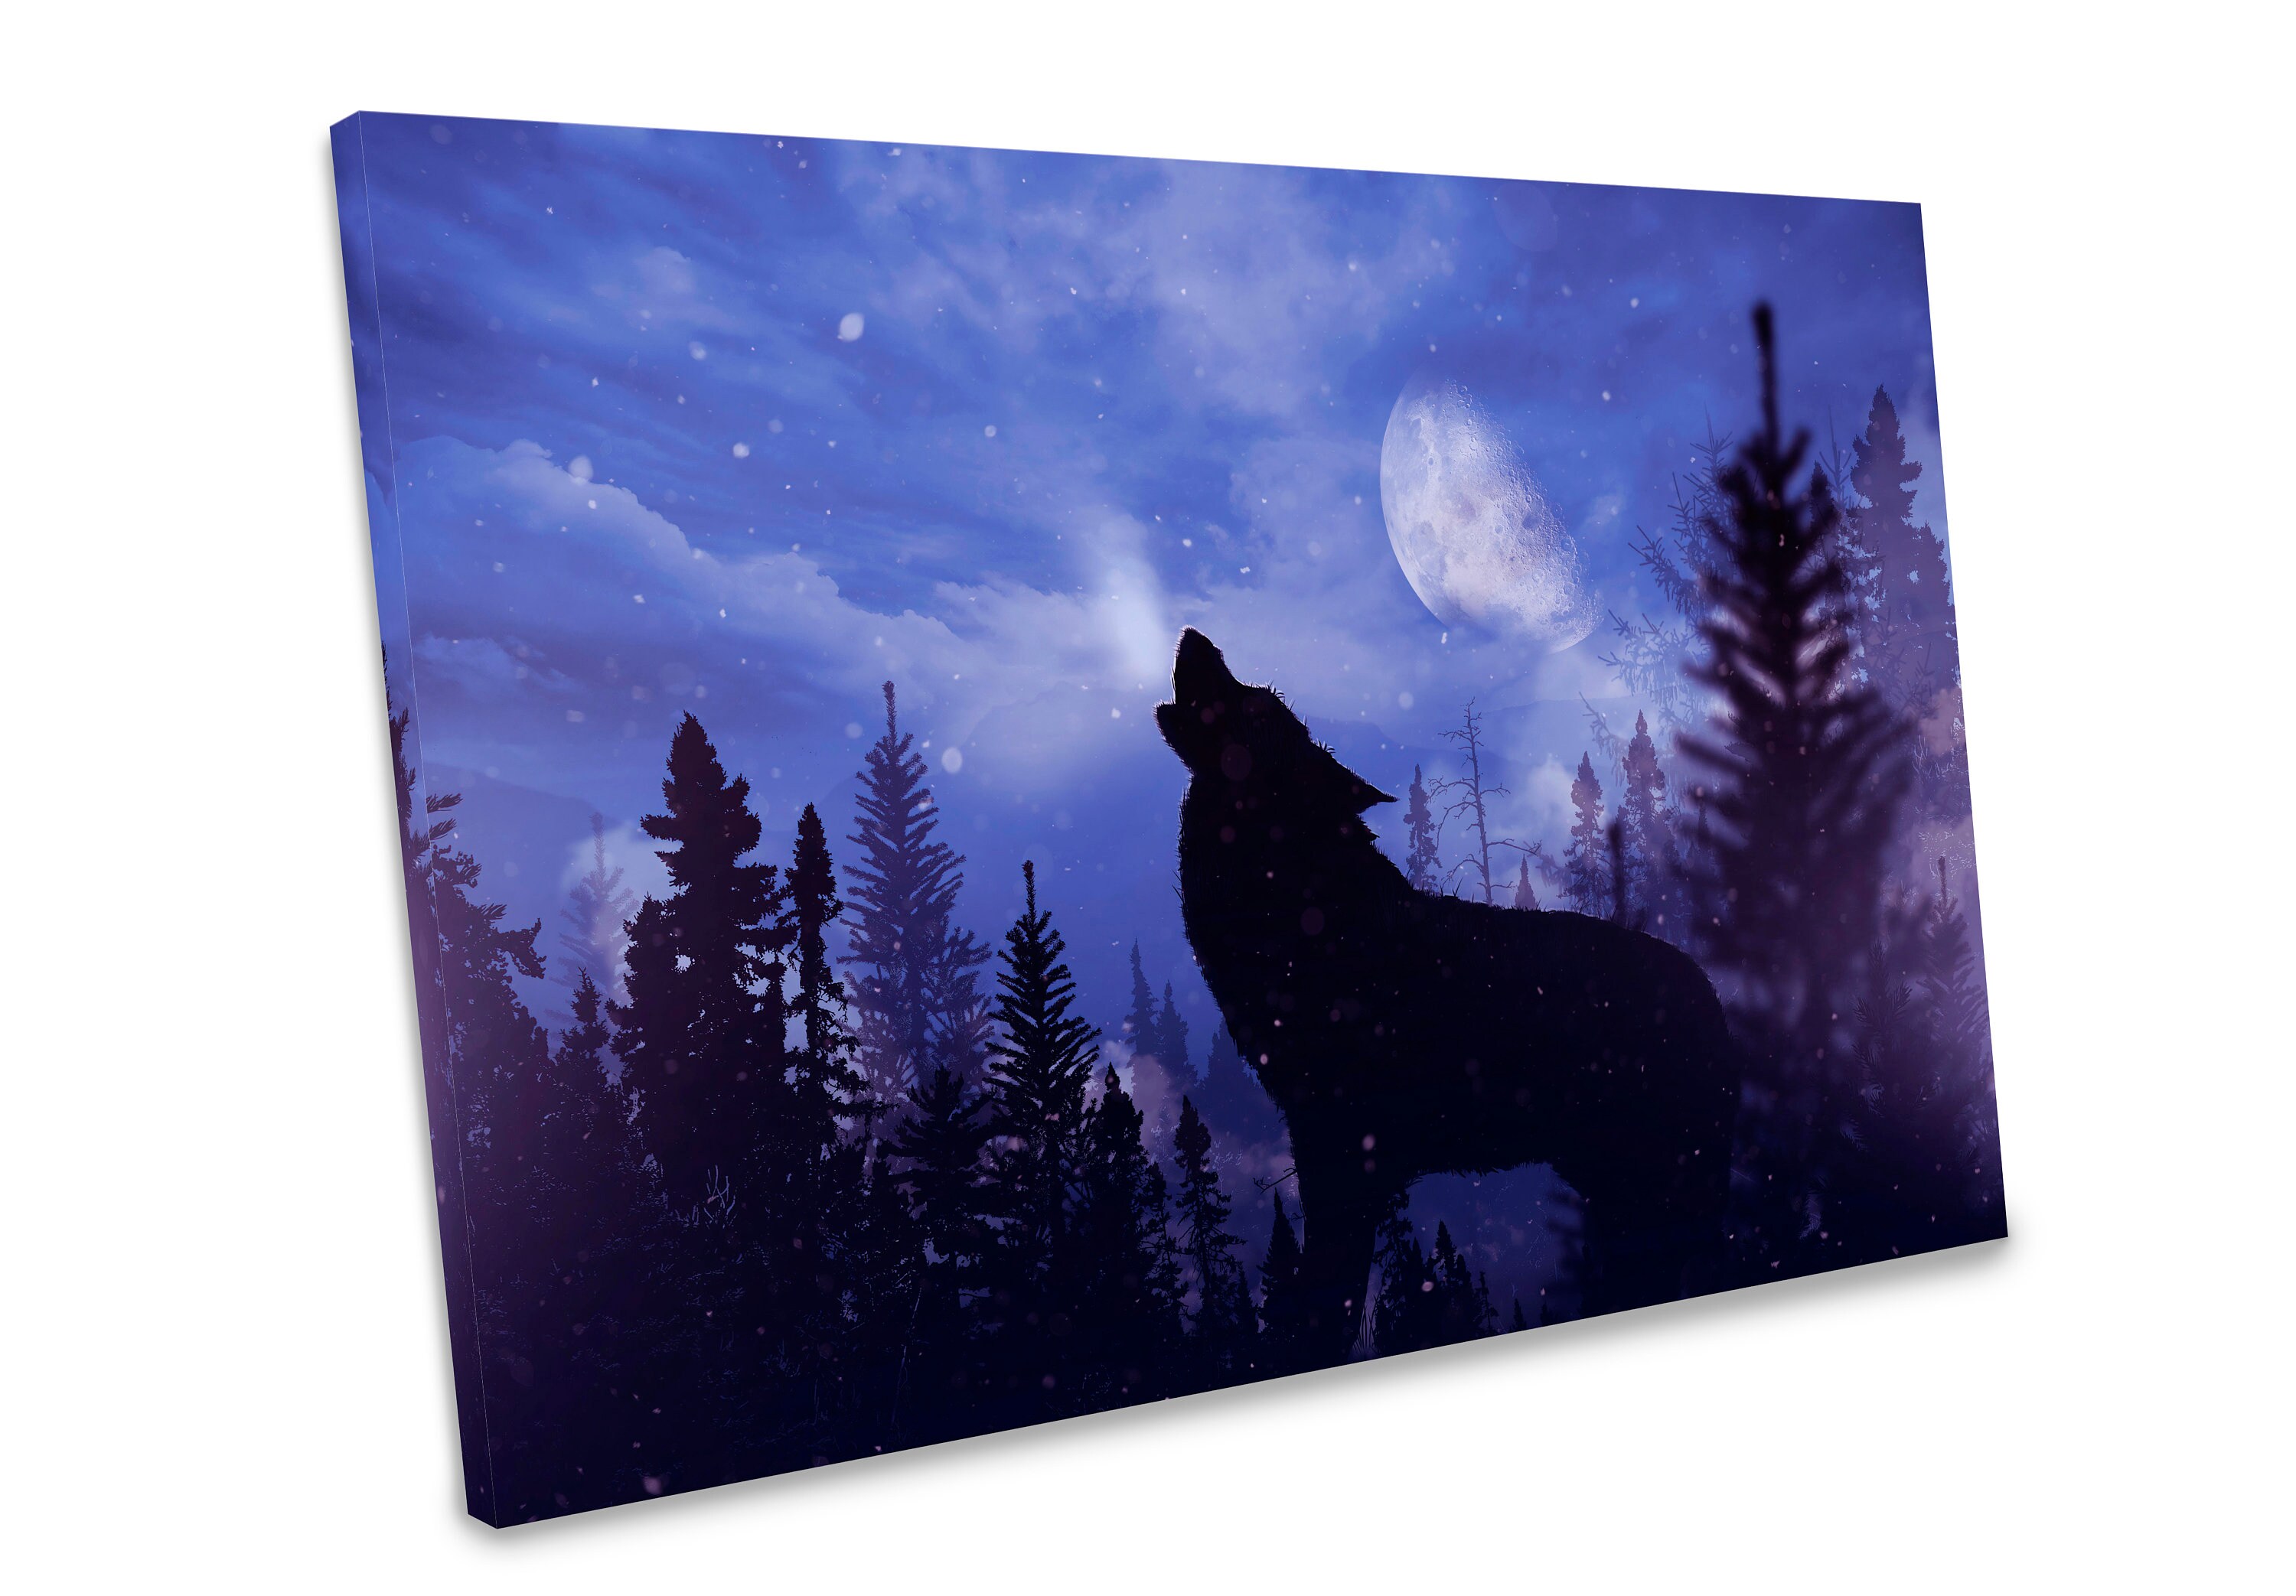 Howling Wolf in Wilderness Silhouette of Wolf And Spruce | Etsy